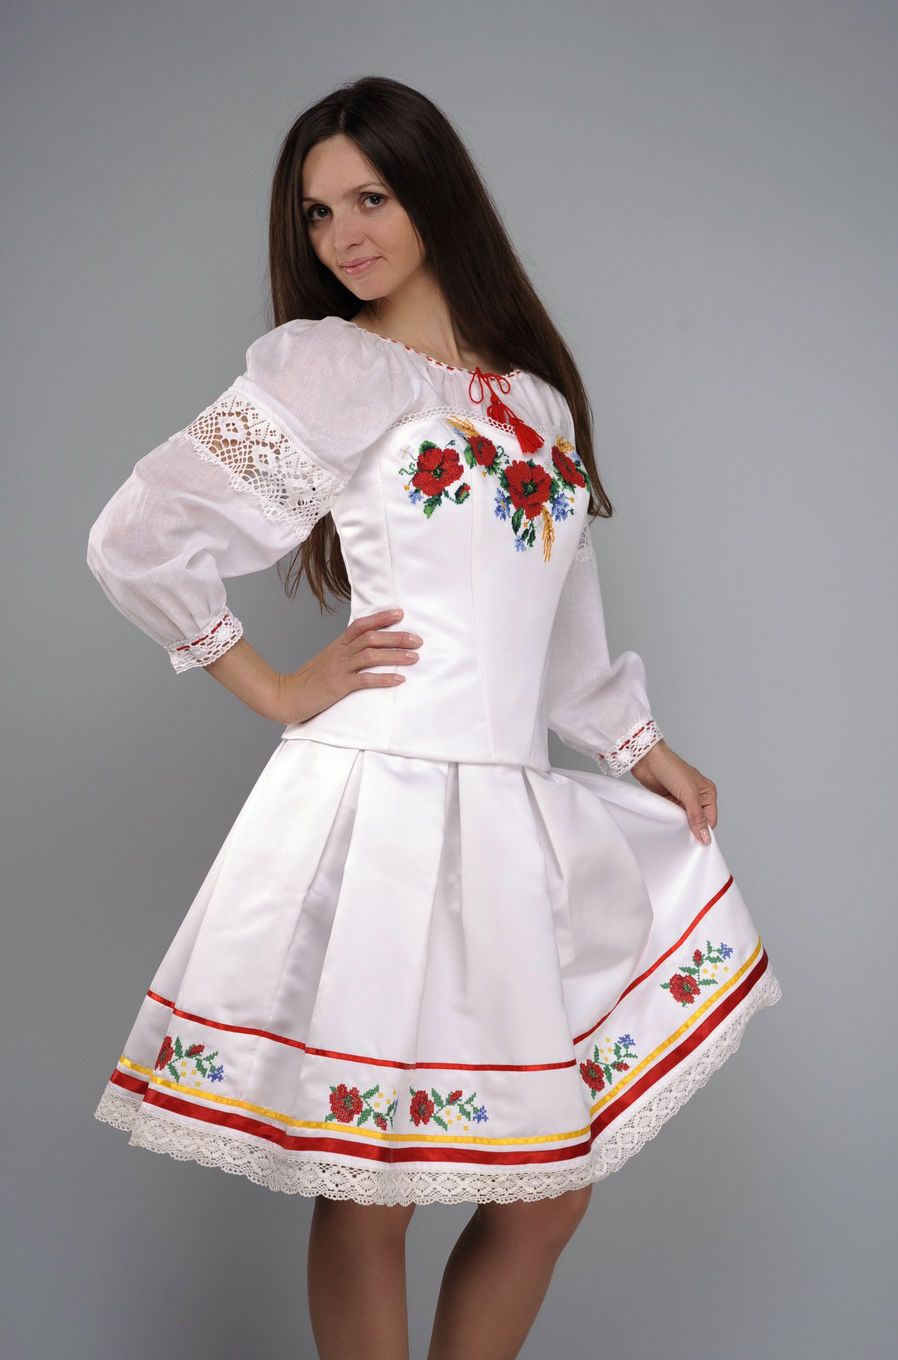 Costume in ethnic style: skirt, blouse and corset photo 4